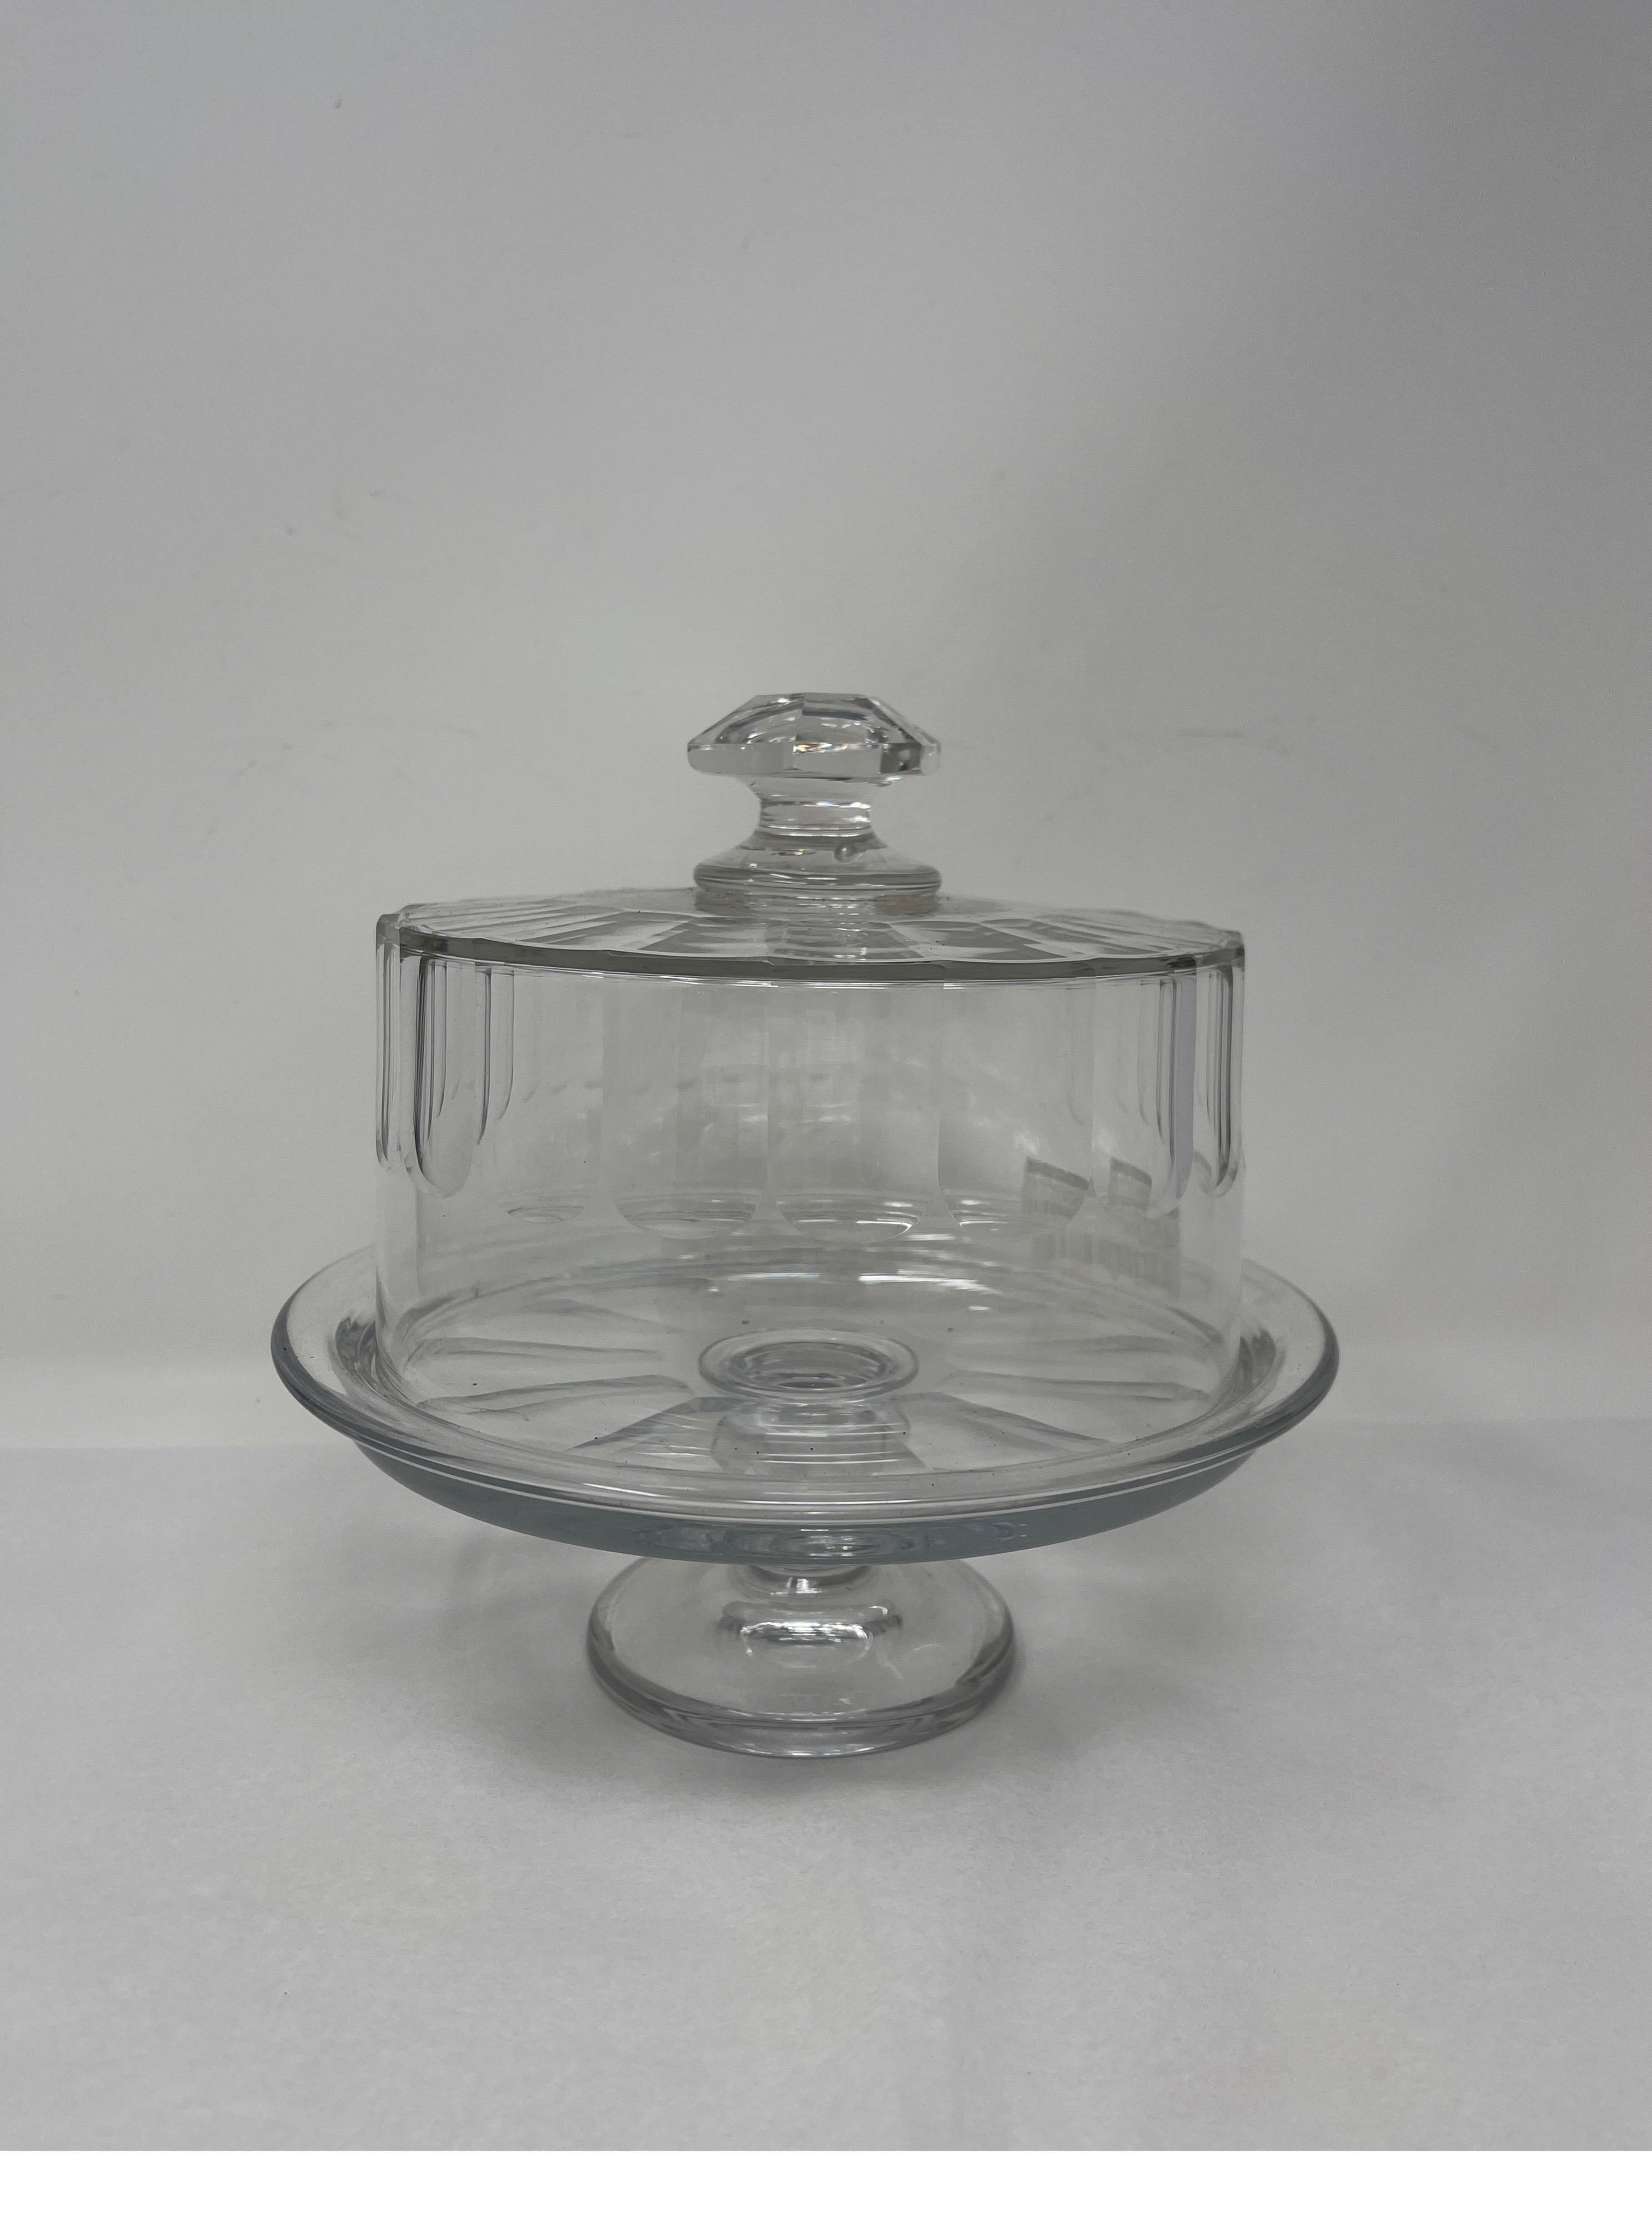 French patisserie cut glass dome cloche with stand. This cloche with beautiful cut glass detailing and stand would look beautiful on a kitchen counter to display cakes or cheeses. 

Measures: 8” diameter x 8” height.